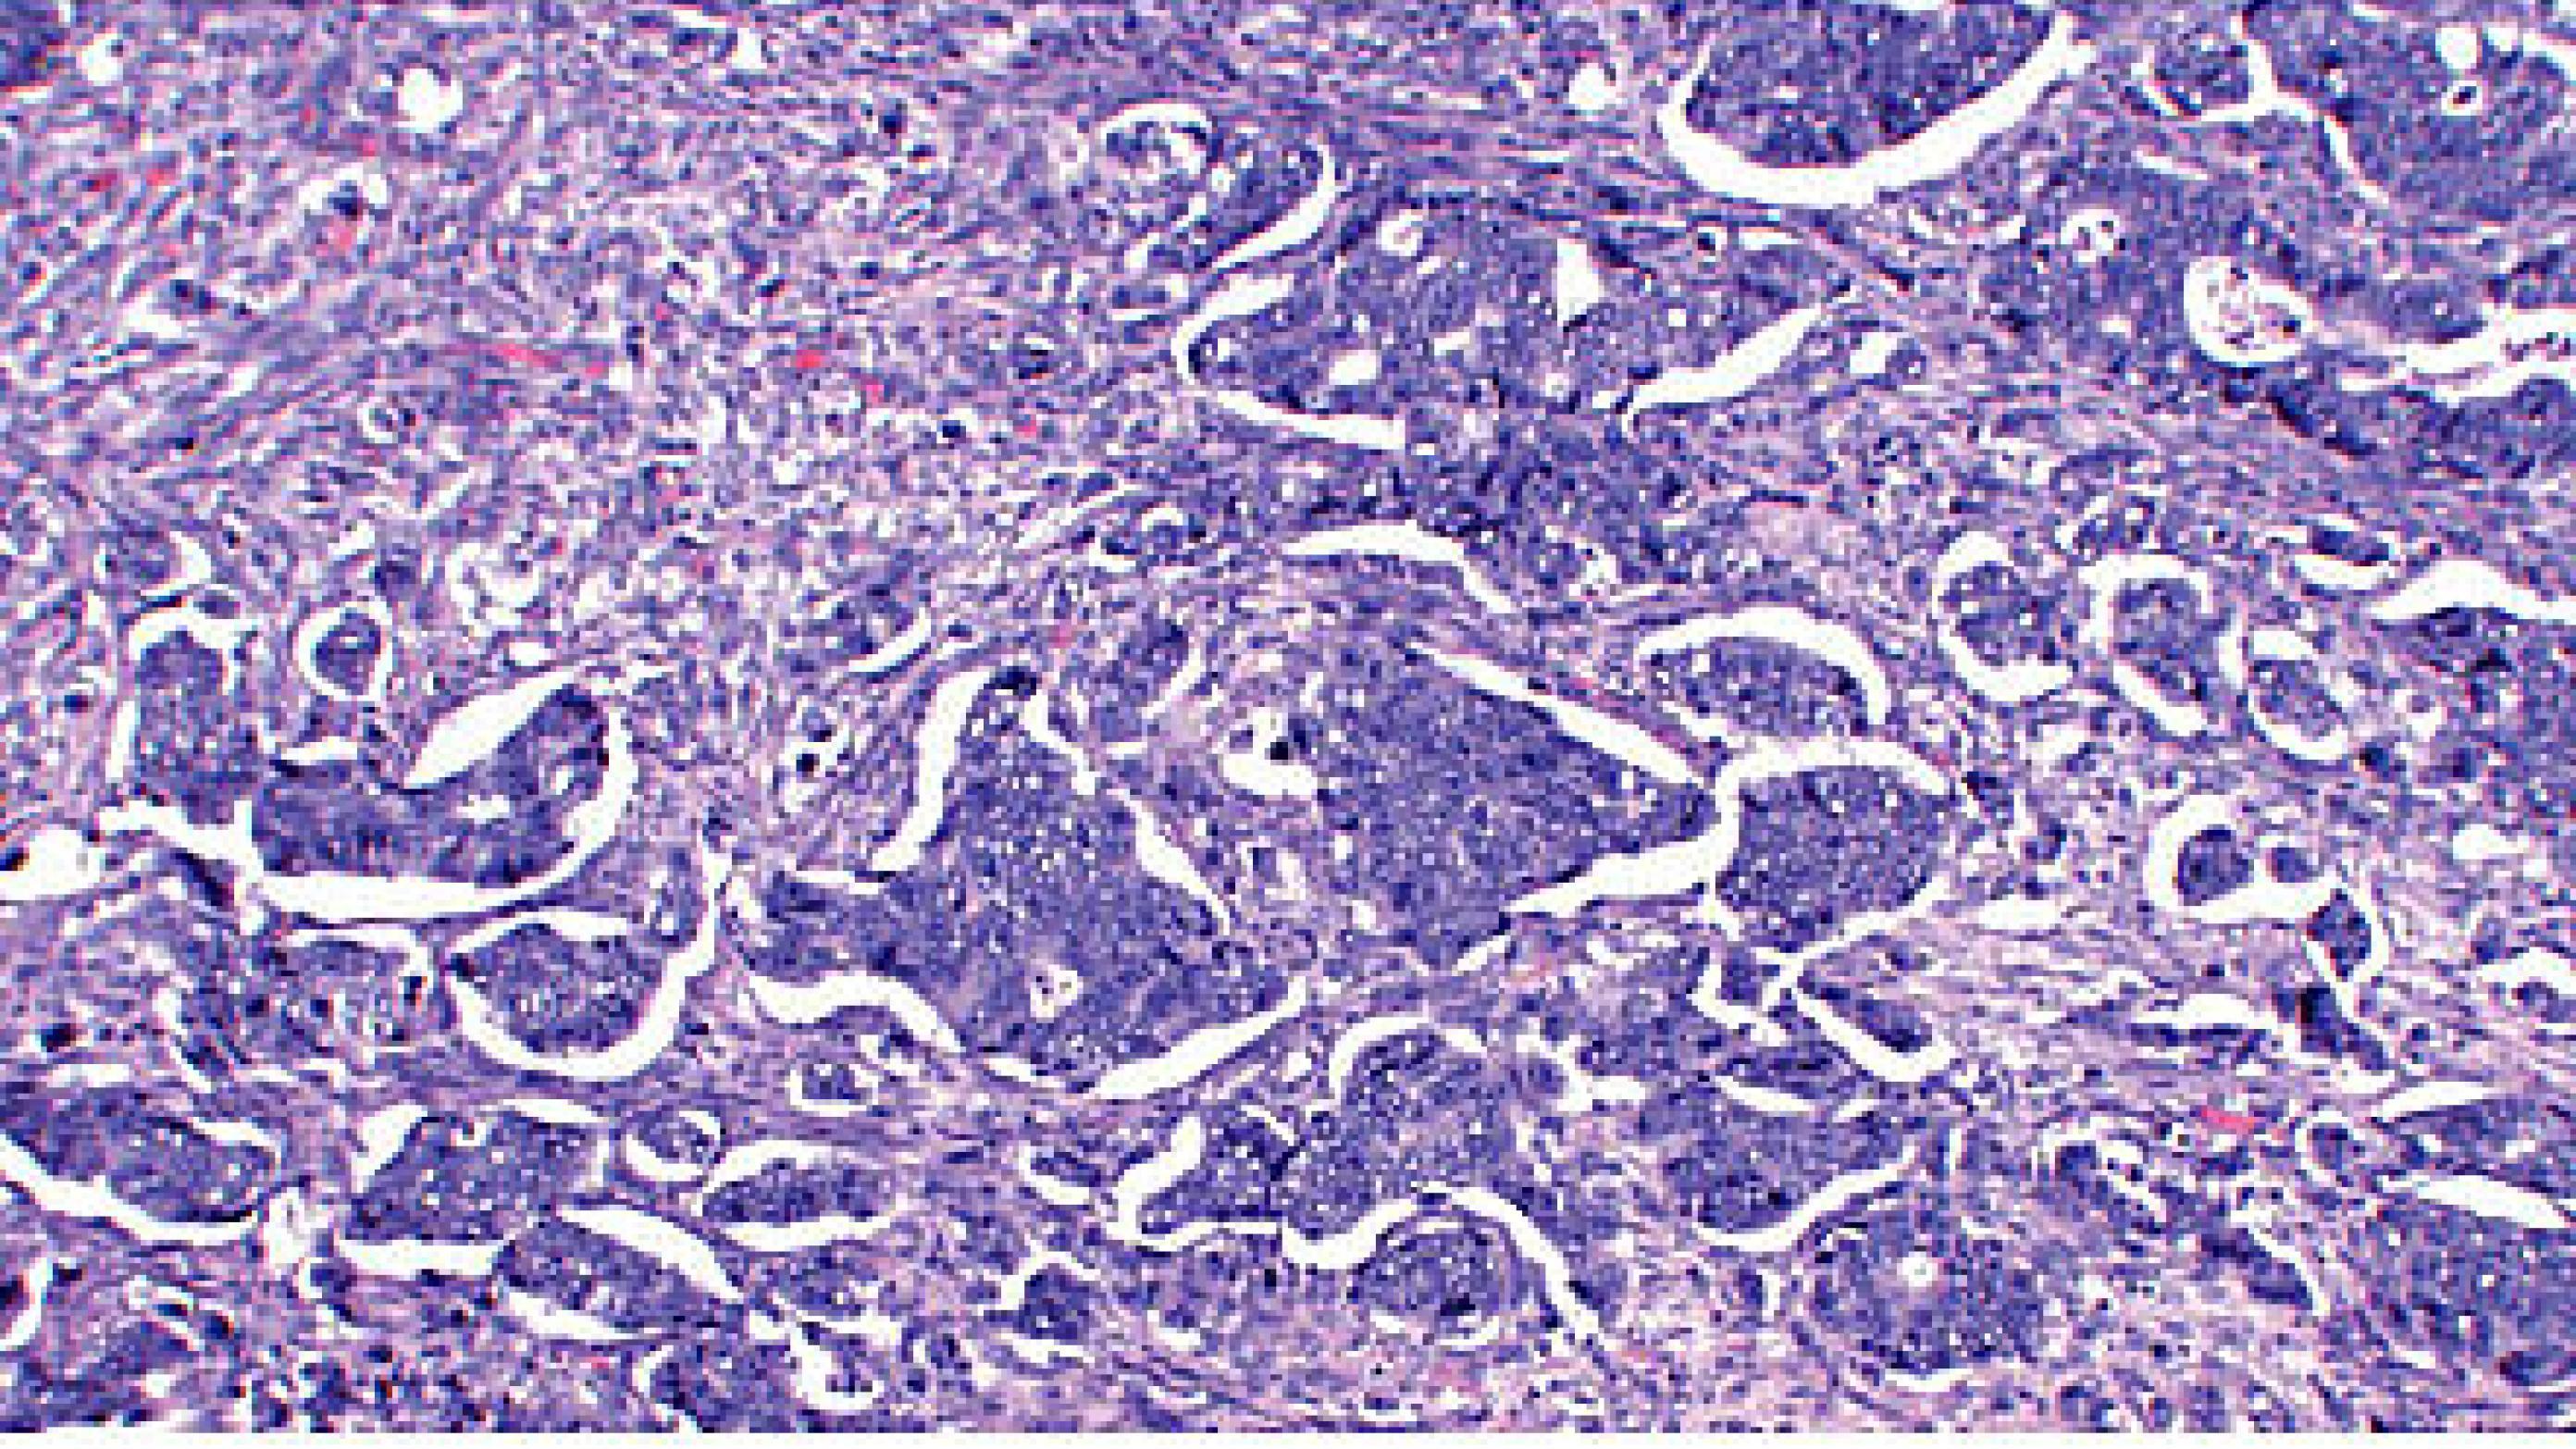 Haematoxylin and eosin-stained section of a colorectal adenocarcinoma.